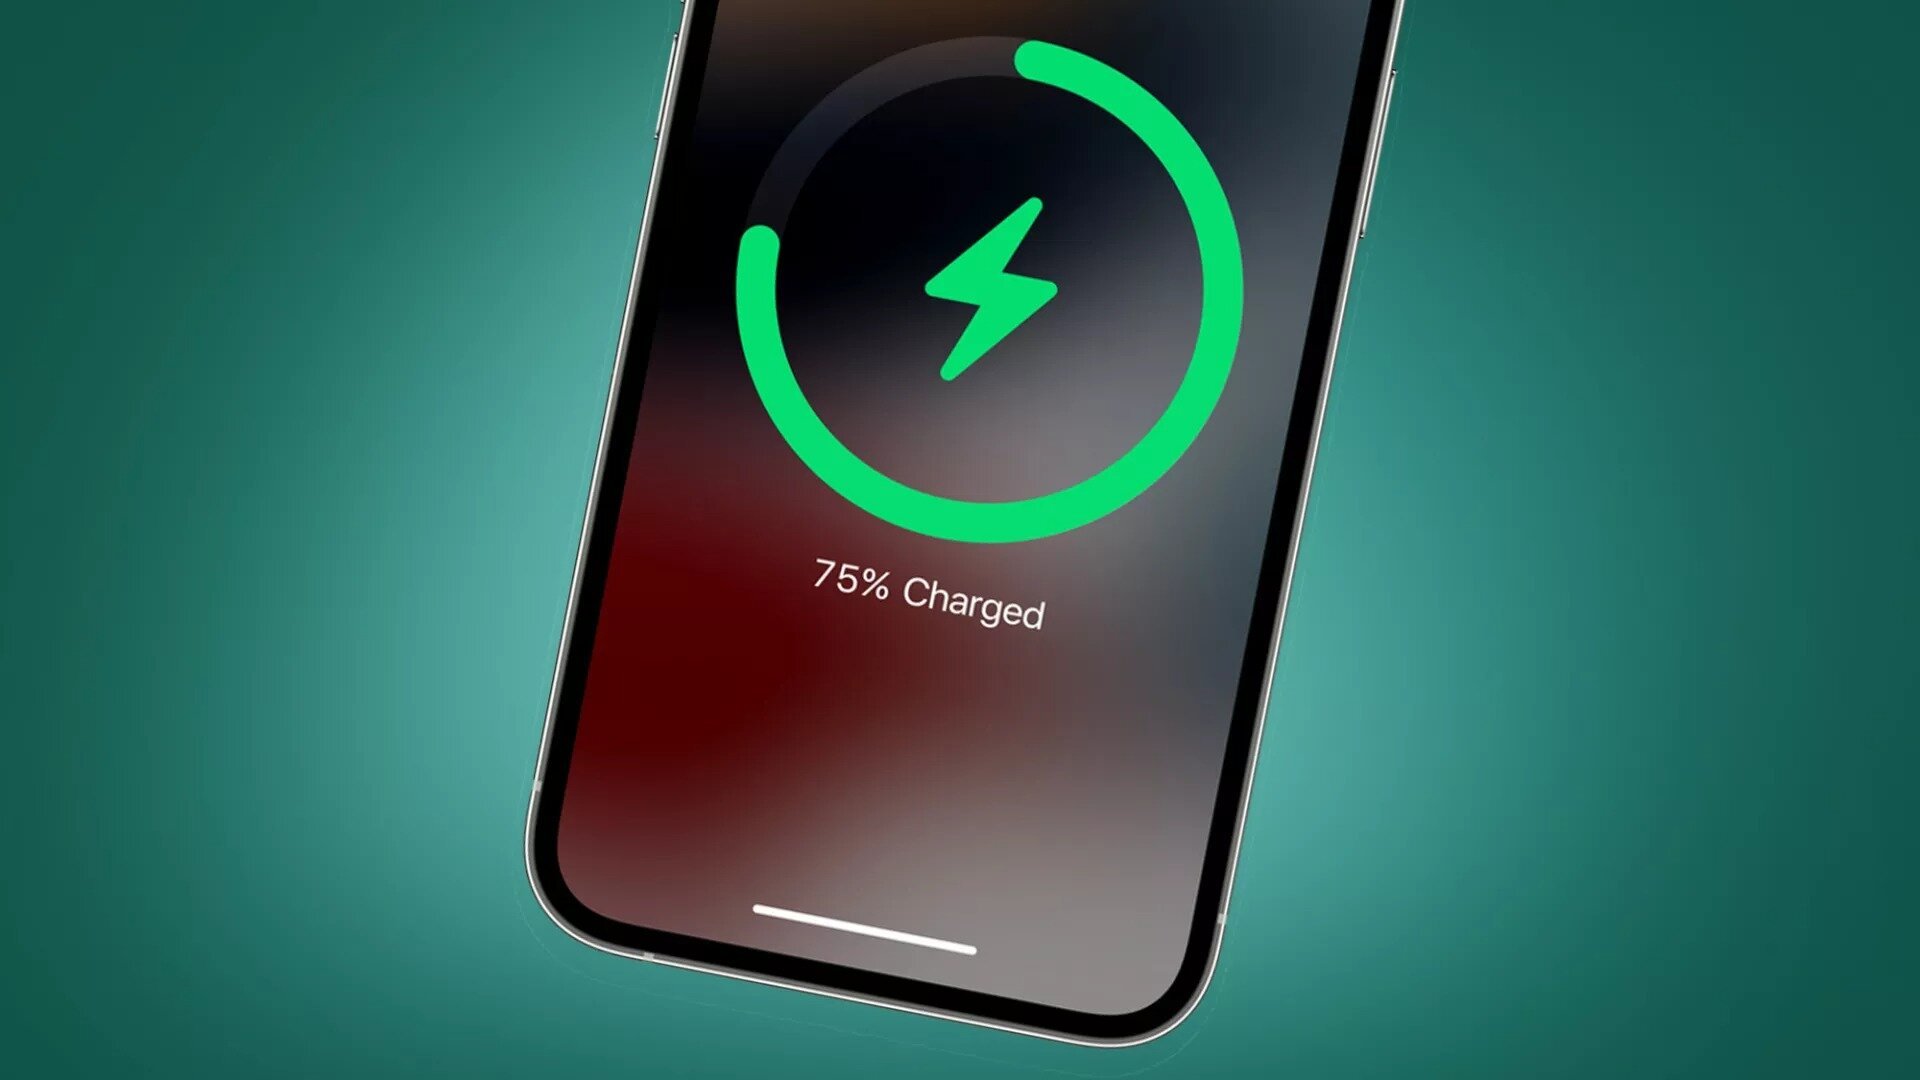 The European Union sends Apple a stern warning about USB-C charging on new iPhones – iPhone